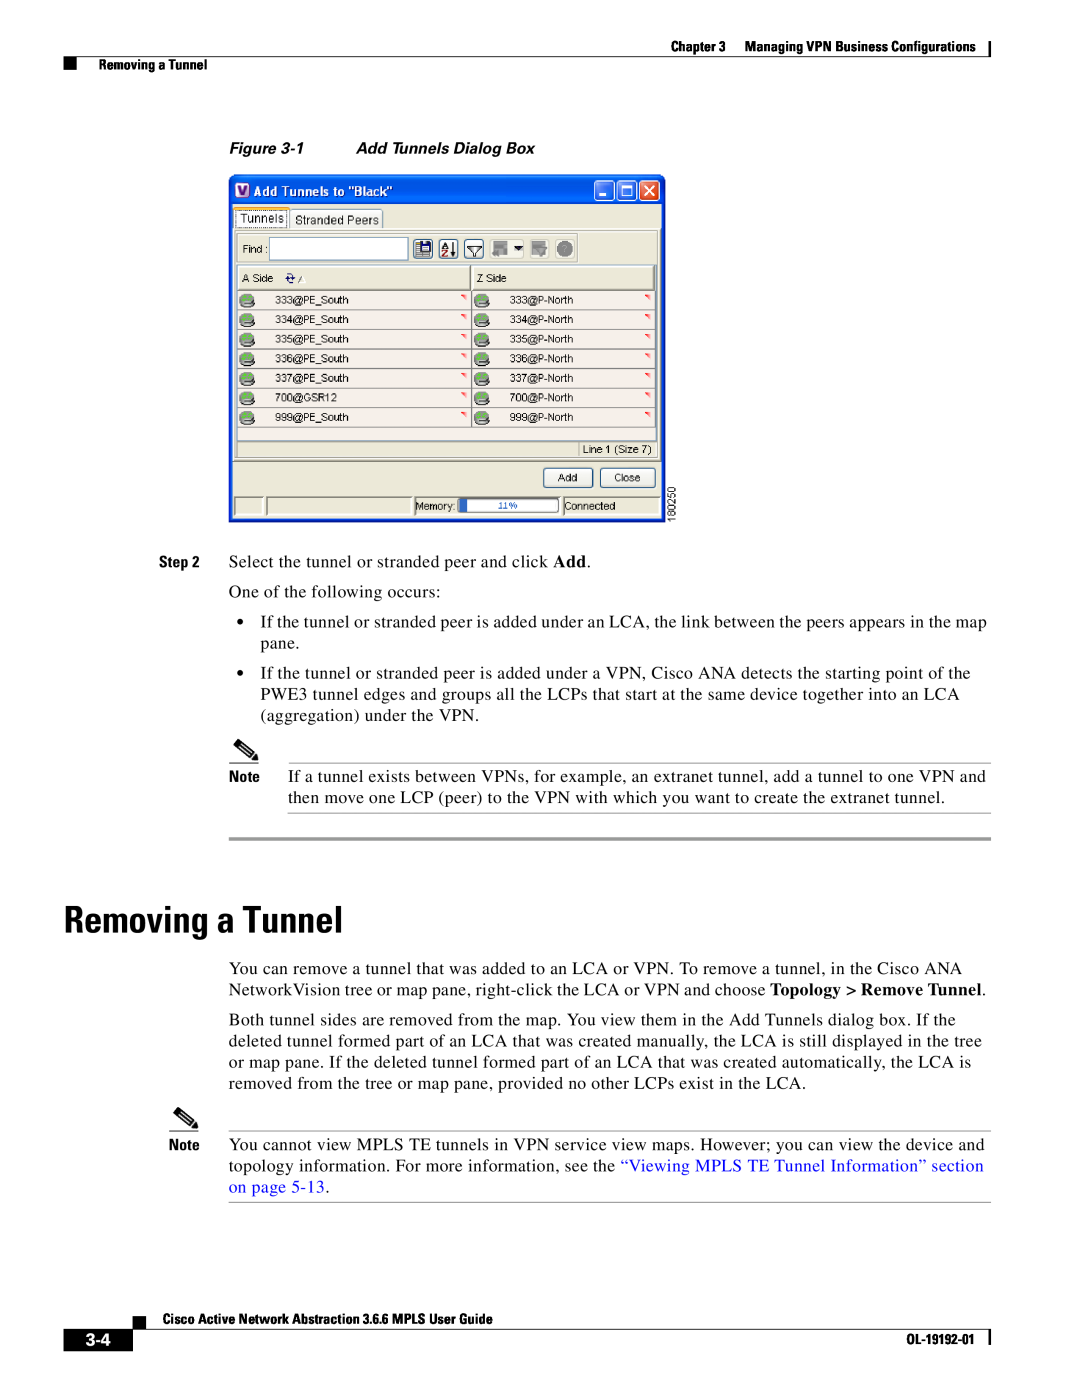 Cisco Systems 3.6.6 manual Removing a Tunnel 